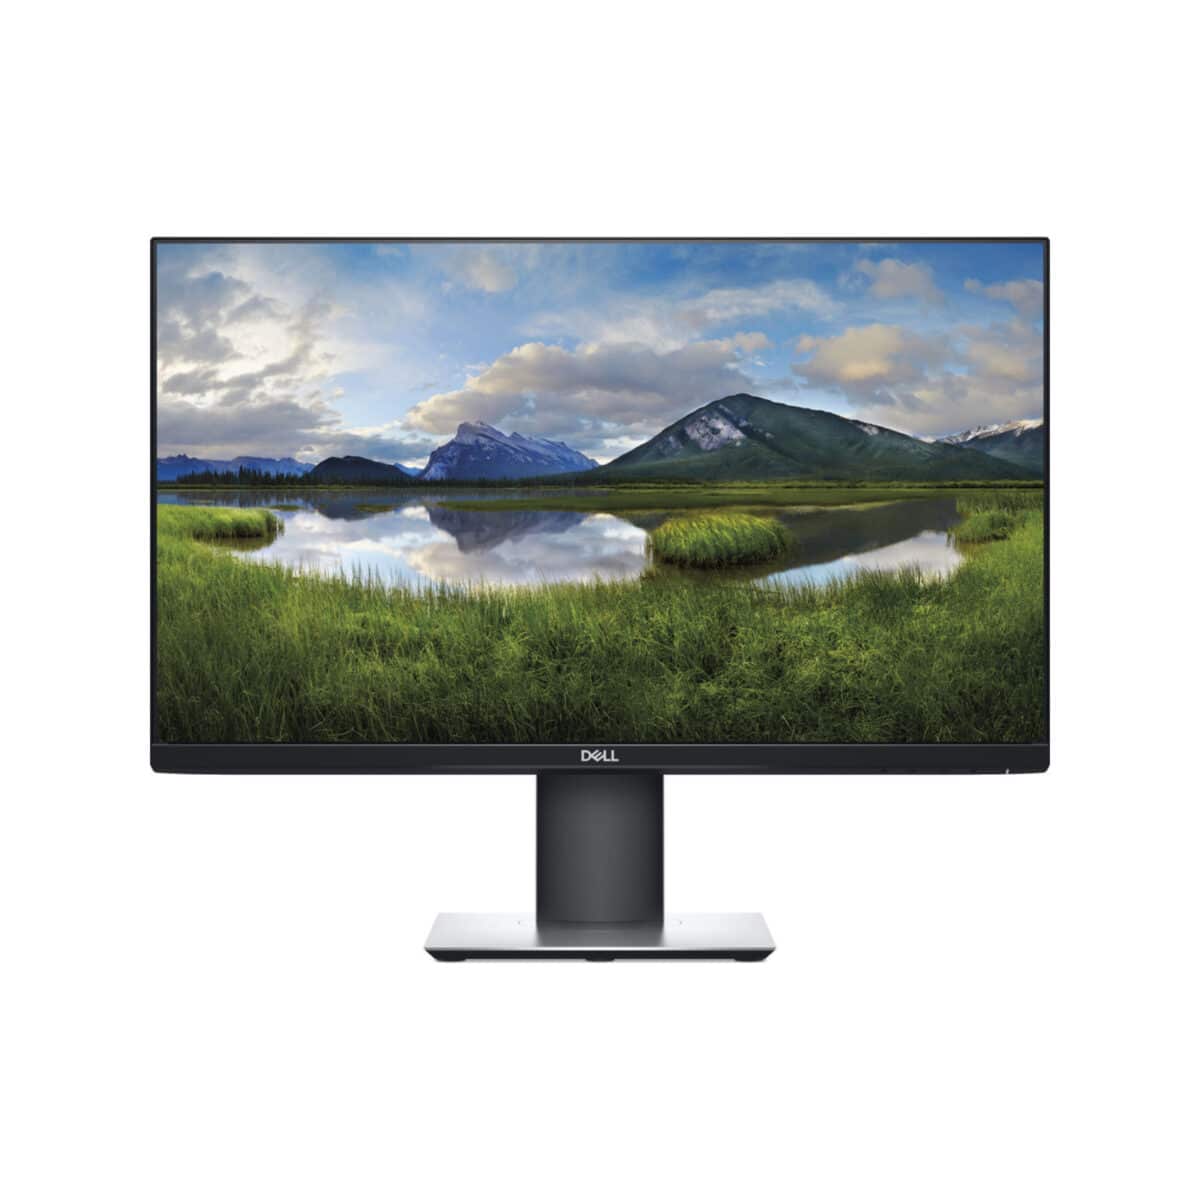 DELL MONITOR P2419HC  23.8 INCH NON TOUCH LED 16:09 ASPECT RATION 1920 X 1080 RESOLUTION 1000:1 CONTRAST RATIO DP HDMI VGA USB 3Y WARRANTY